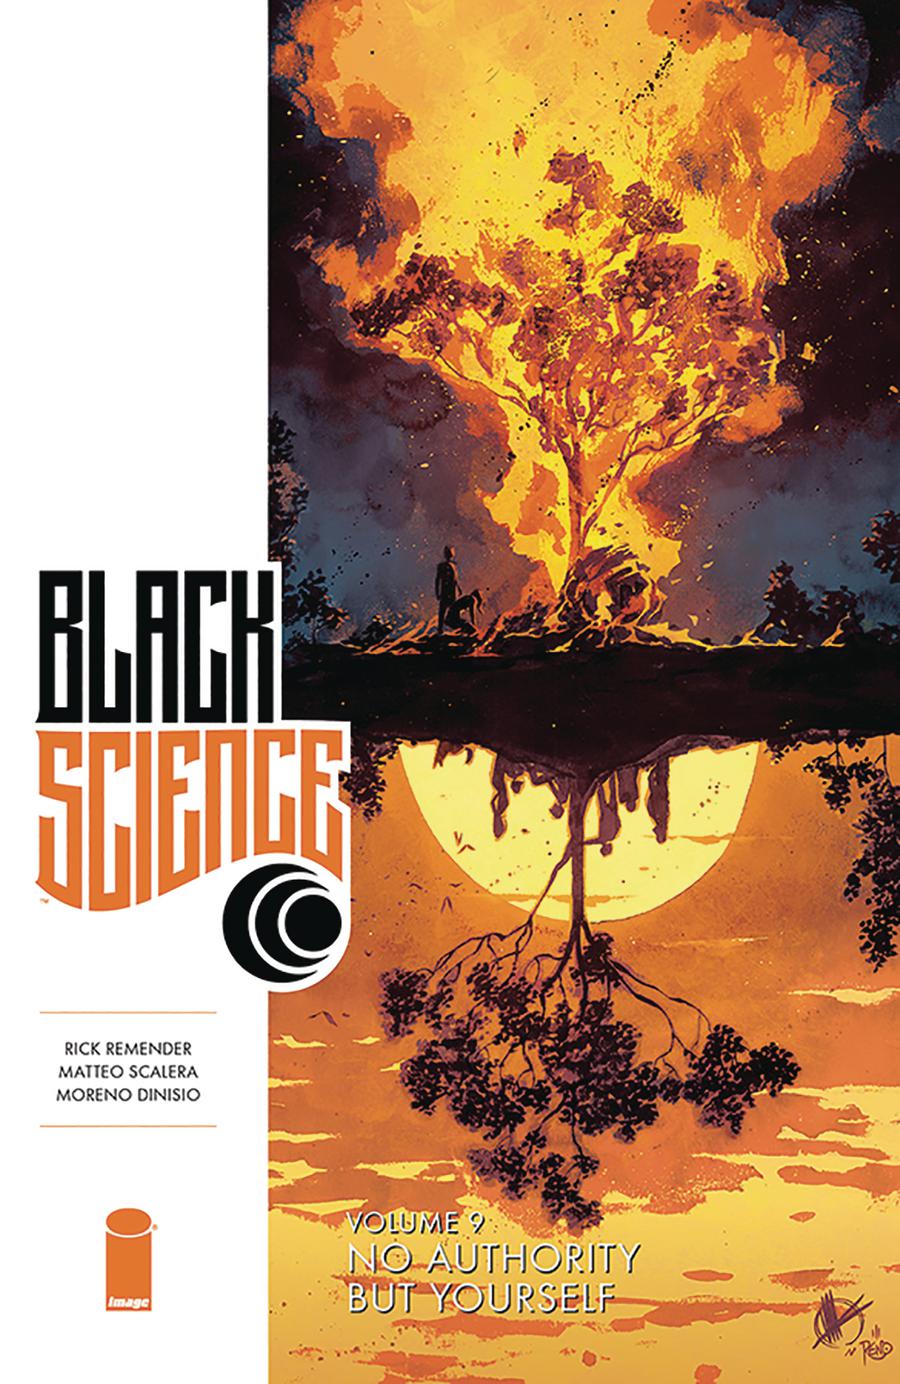 Black Science Vol 9 No Authority But Yourself TP